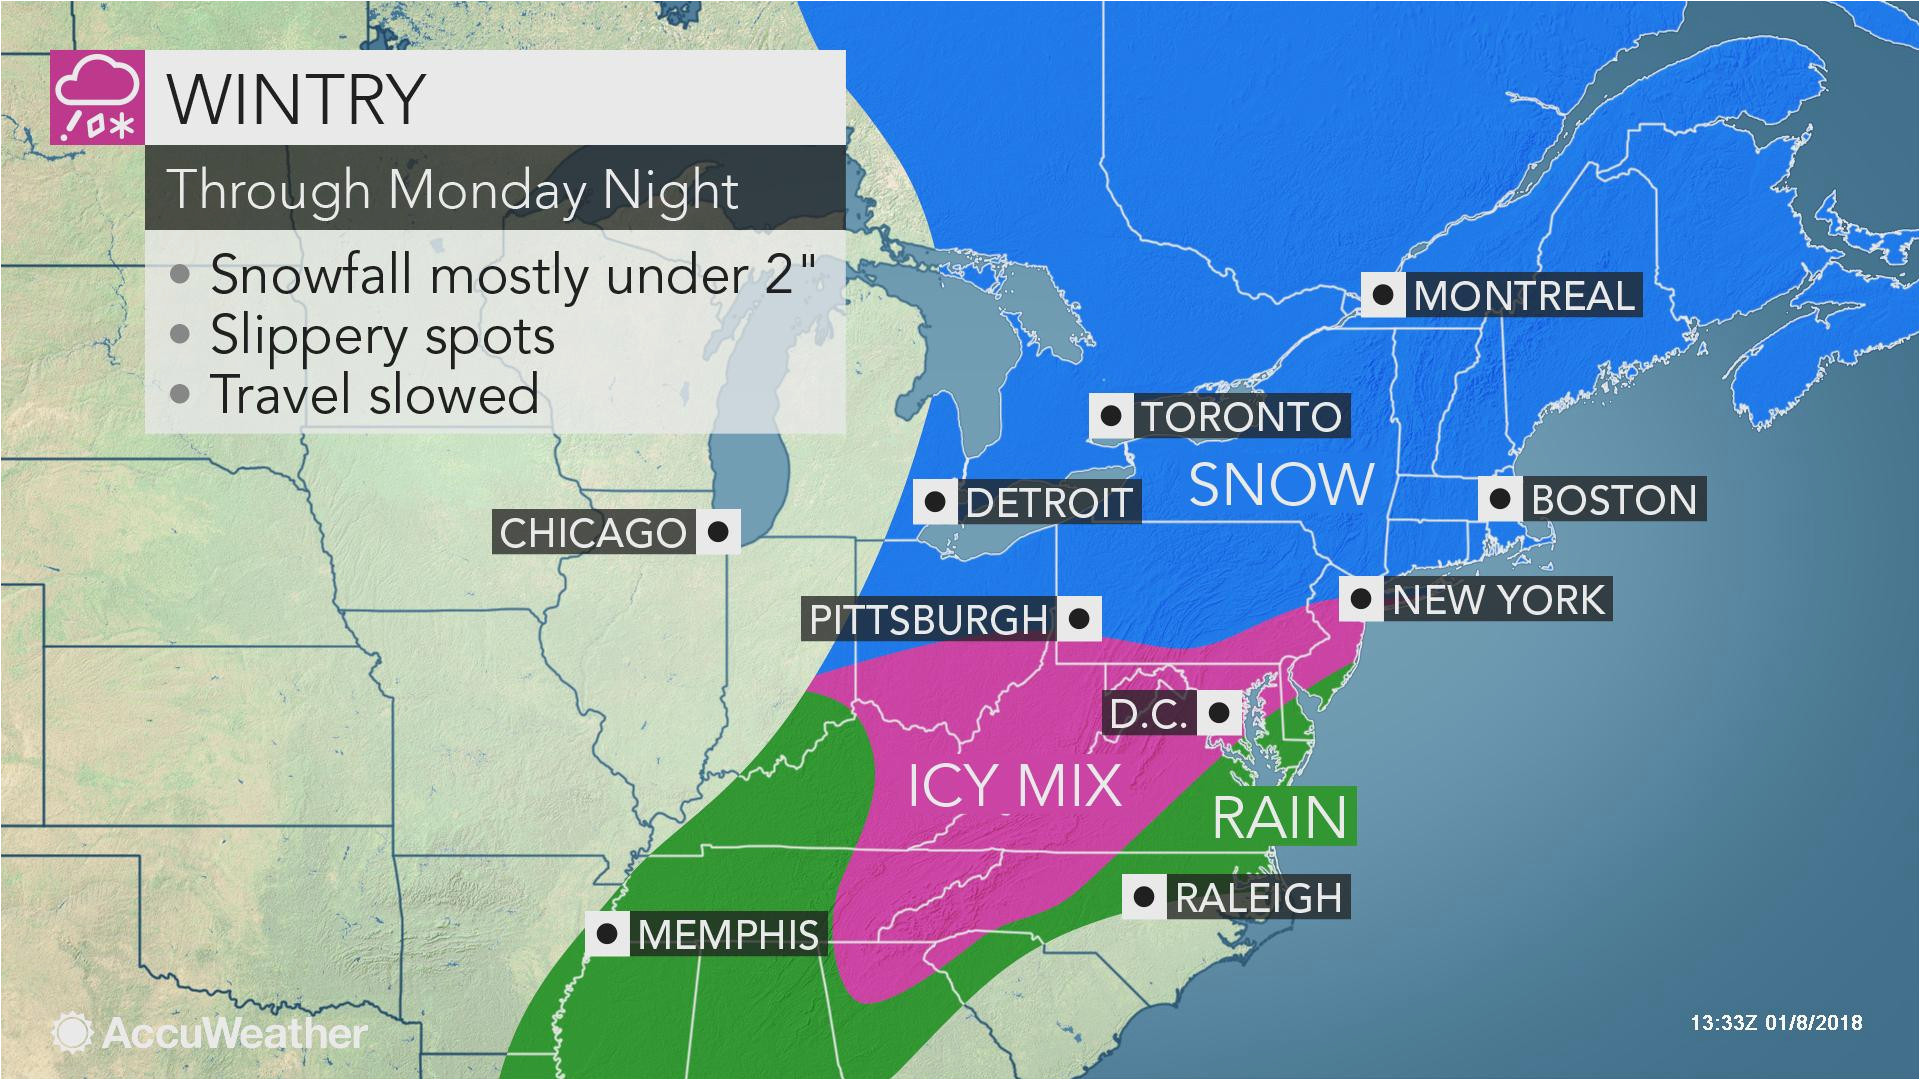 ice snow may turn roads into skating rink in eastern us on monday